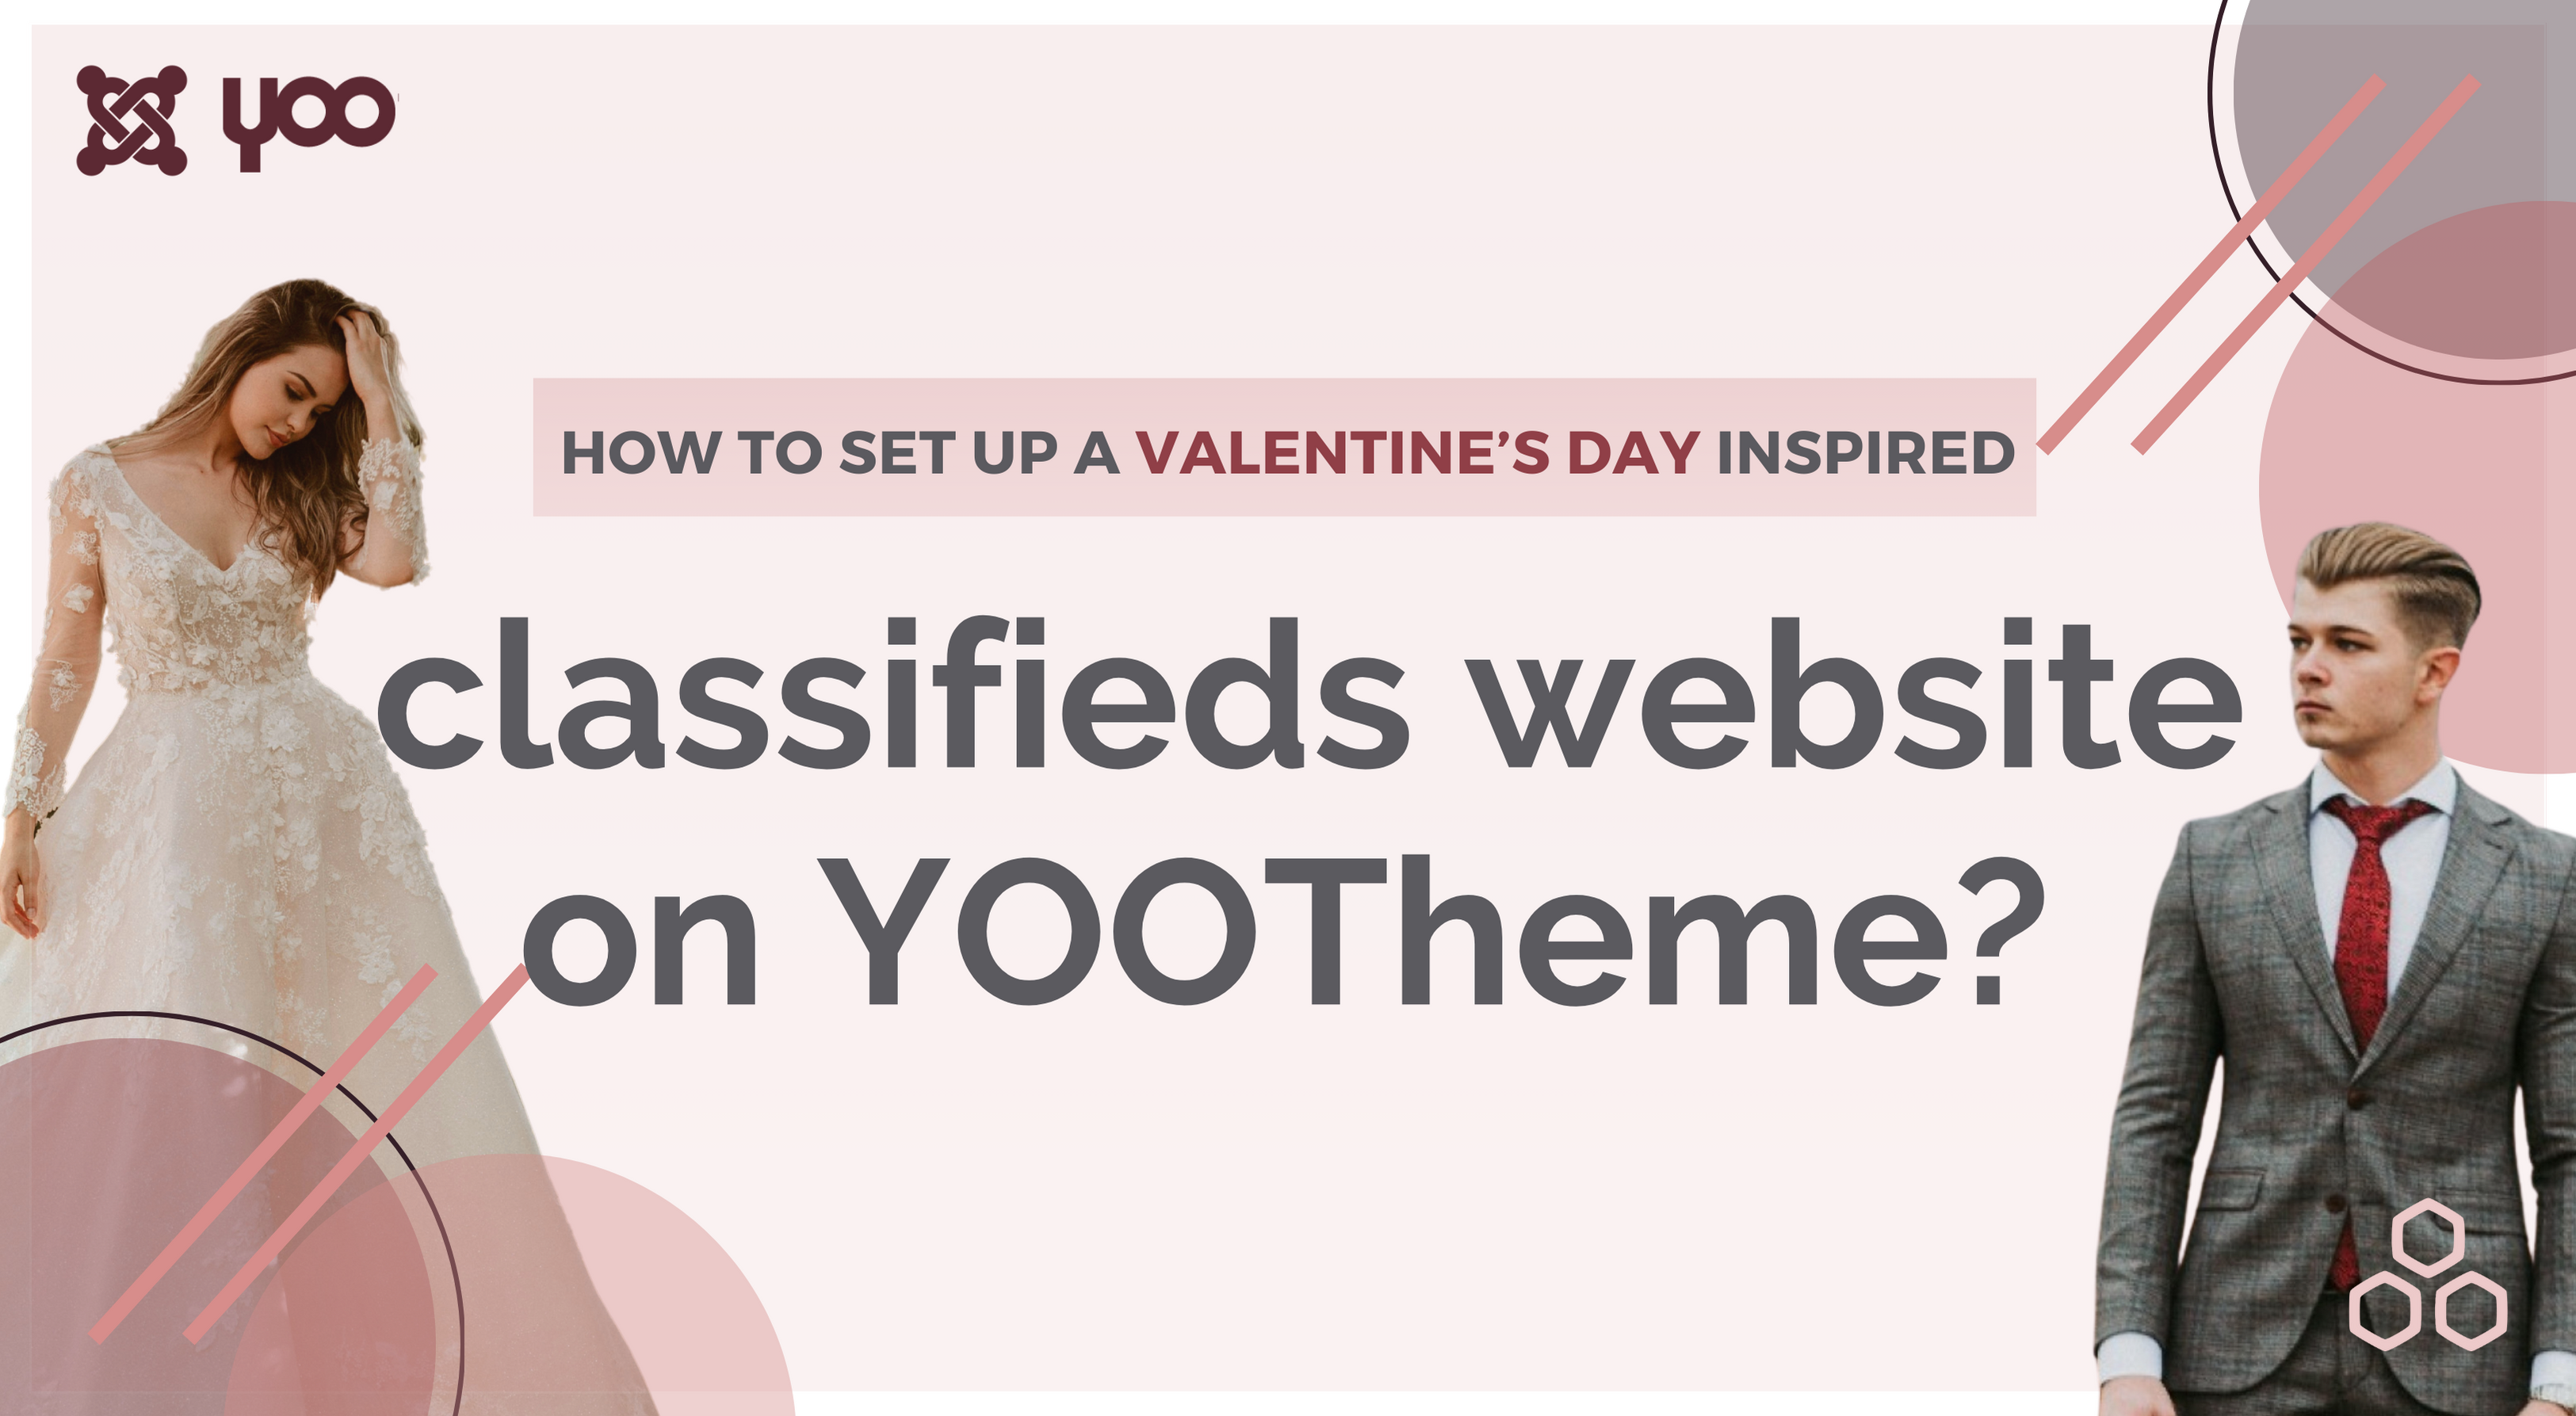 How to set up a Valentine’s Day inspired classifieds website on YOOTheme?